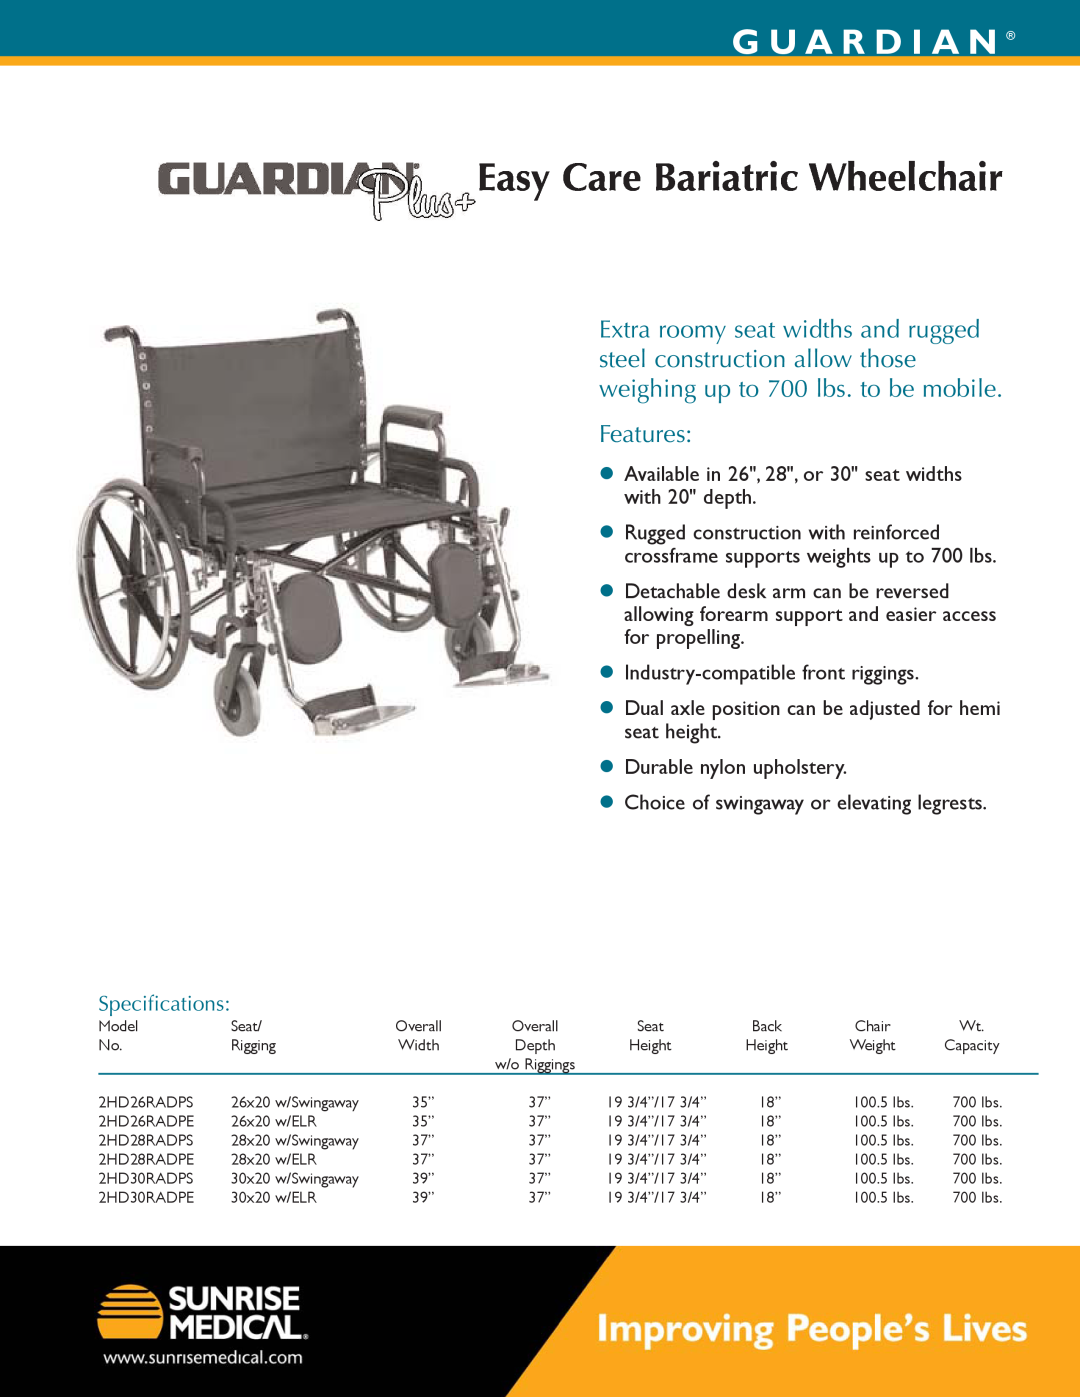 Sunrise Medical 2HD26RADPS, 2HD30RADPS specifications Guardian Easy Care Bariatric Wheelchair, G U A R D I A N, Features 